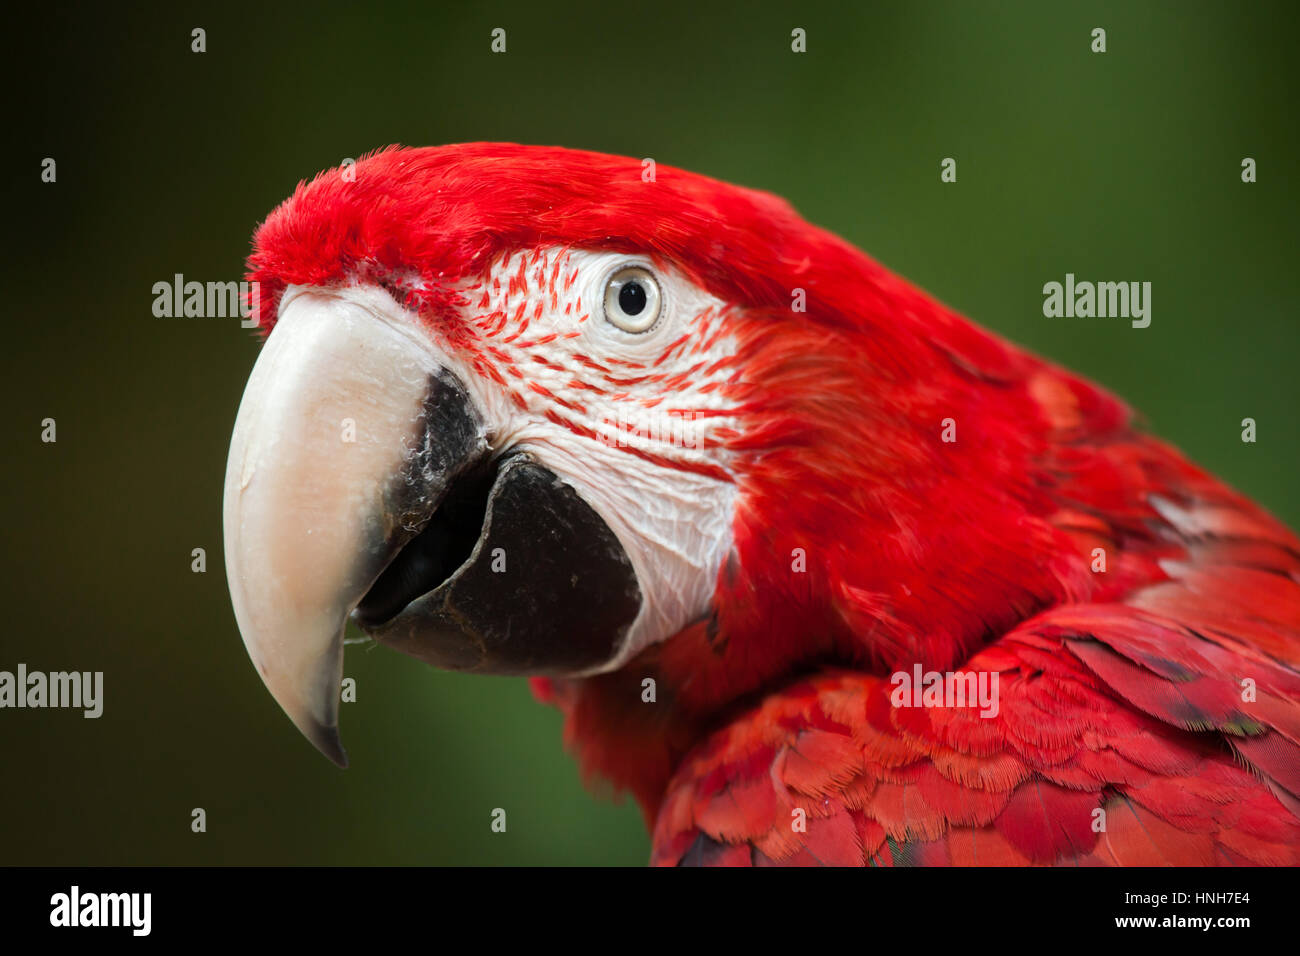 Green-winged macaw (Ara chloropterus), also known as the red-and-green macaw. Stock Photo